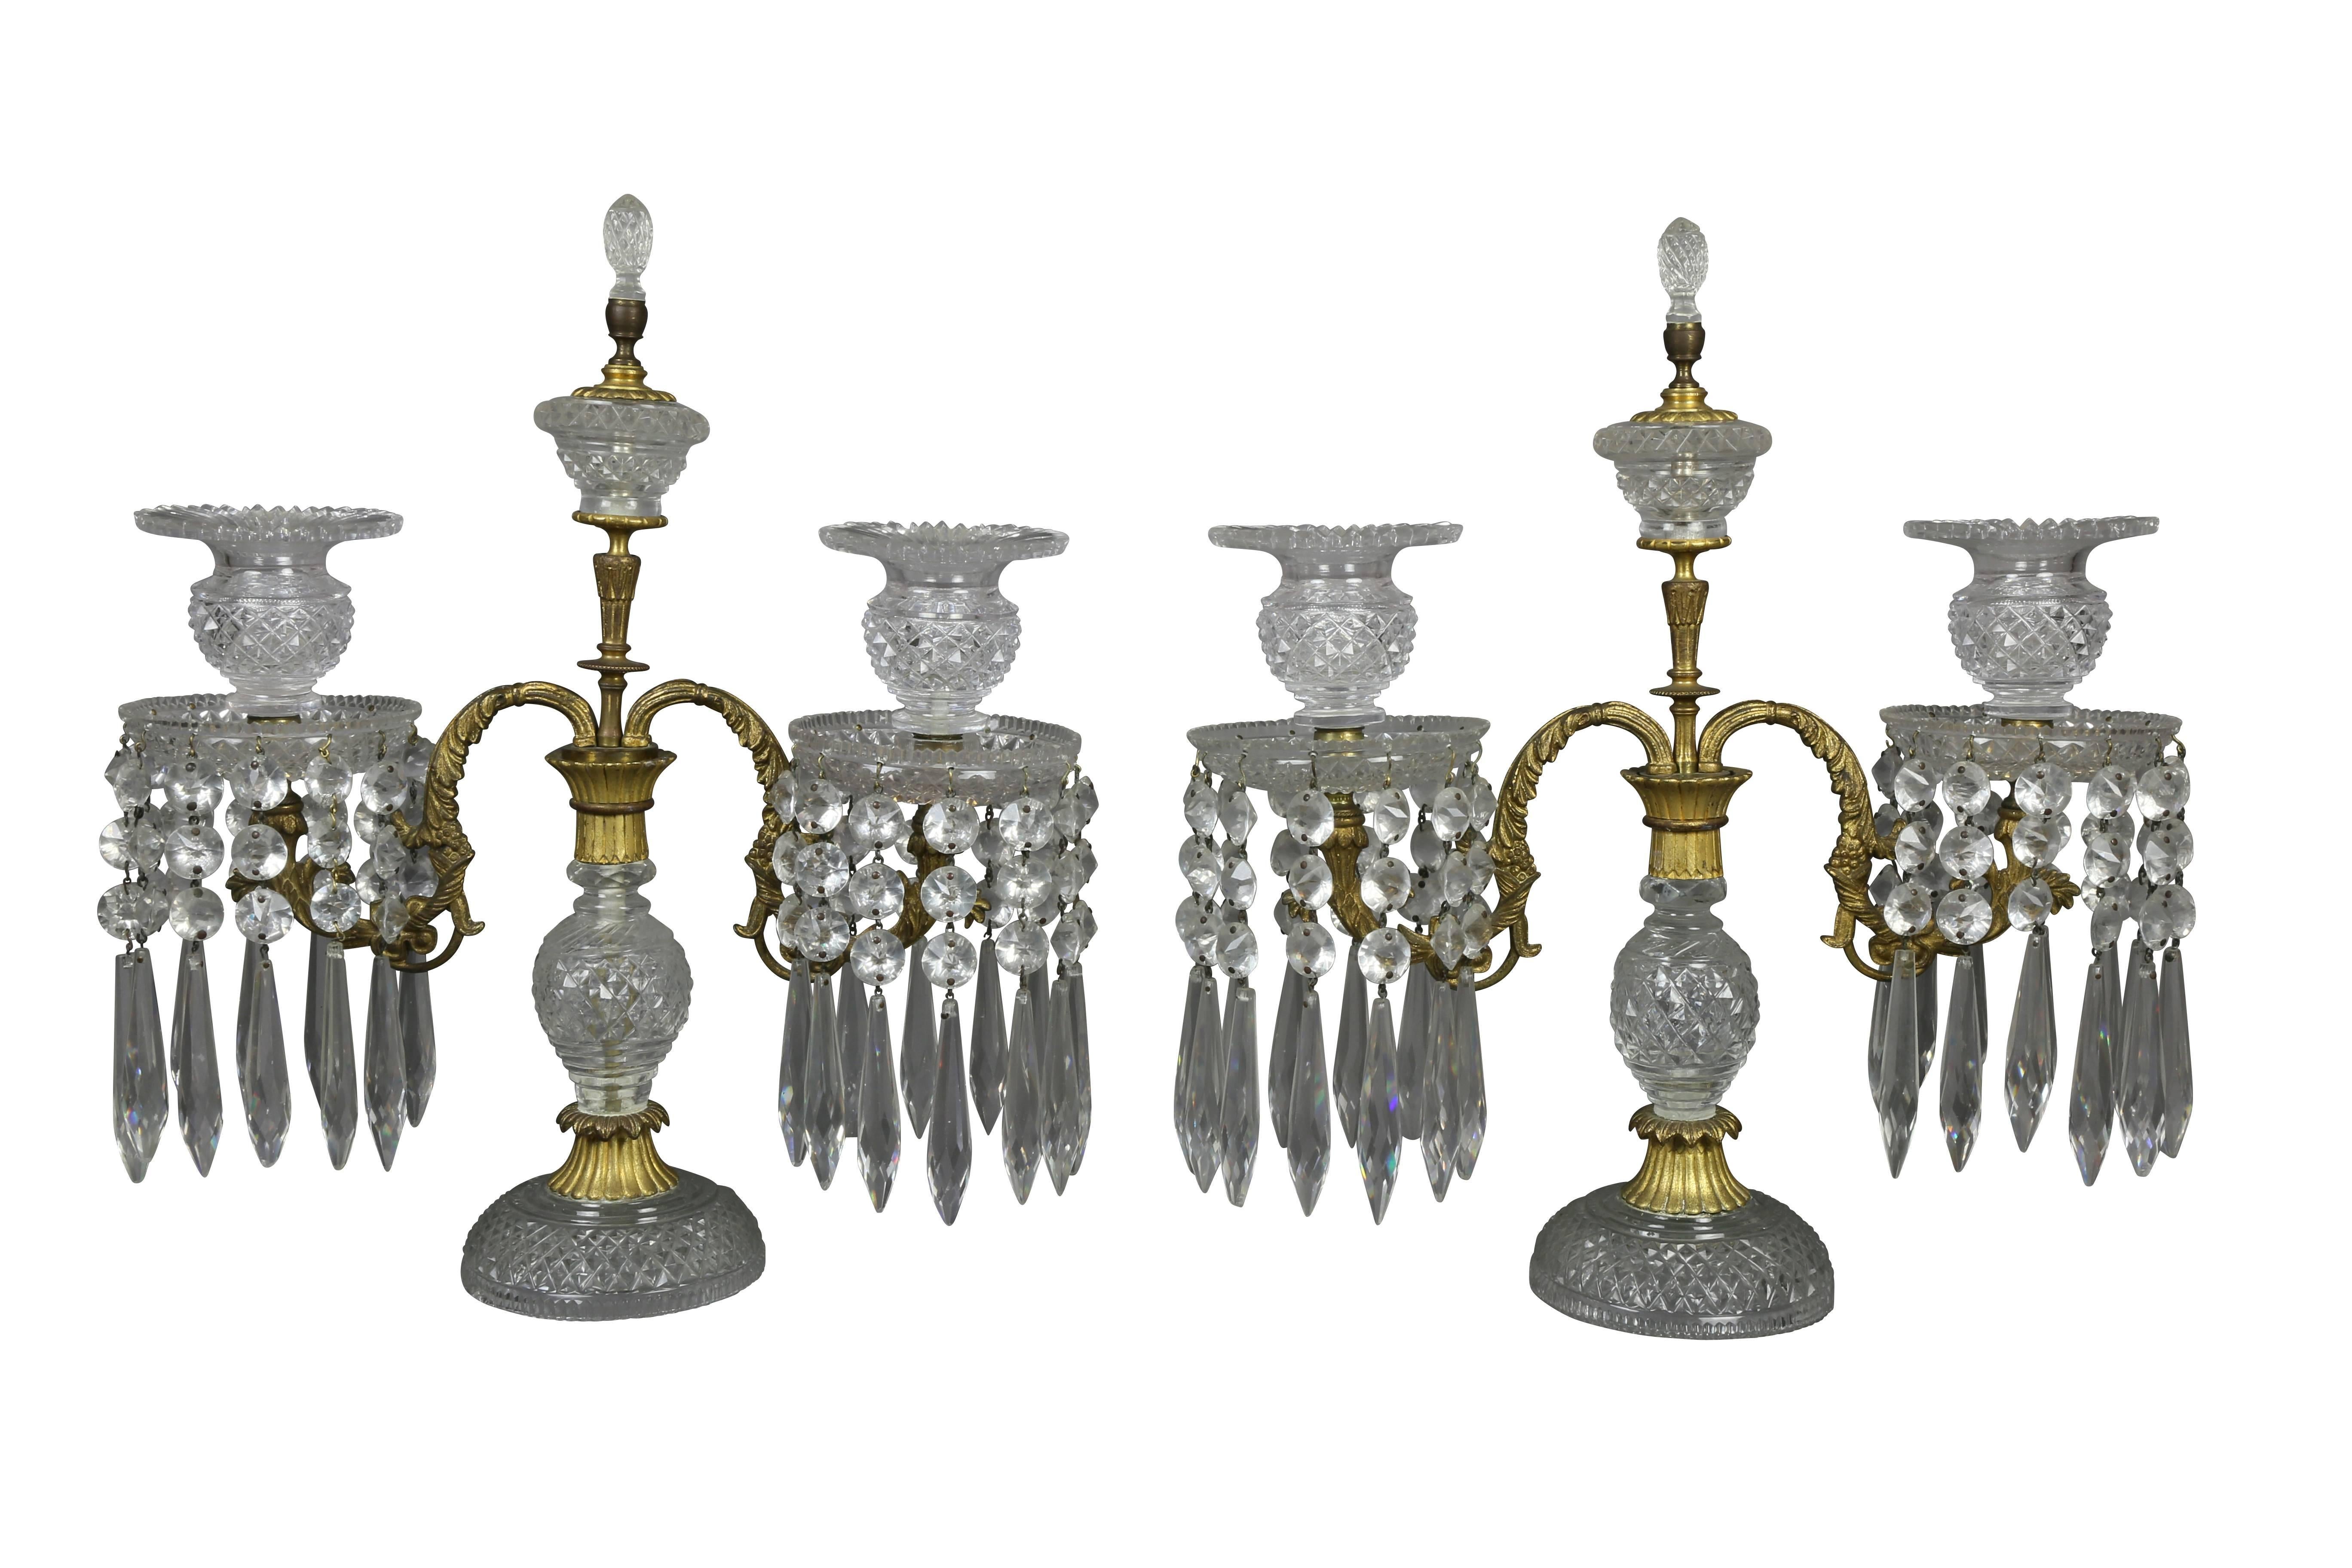 Each with two arms with suspended prisms, central glass finial, raised on cut-glass support and circular foot.